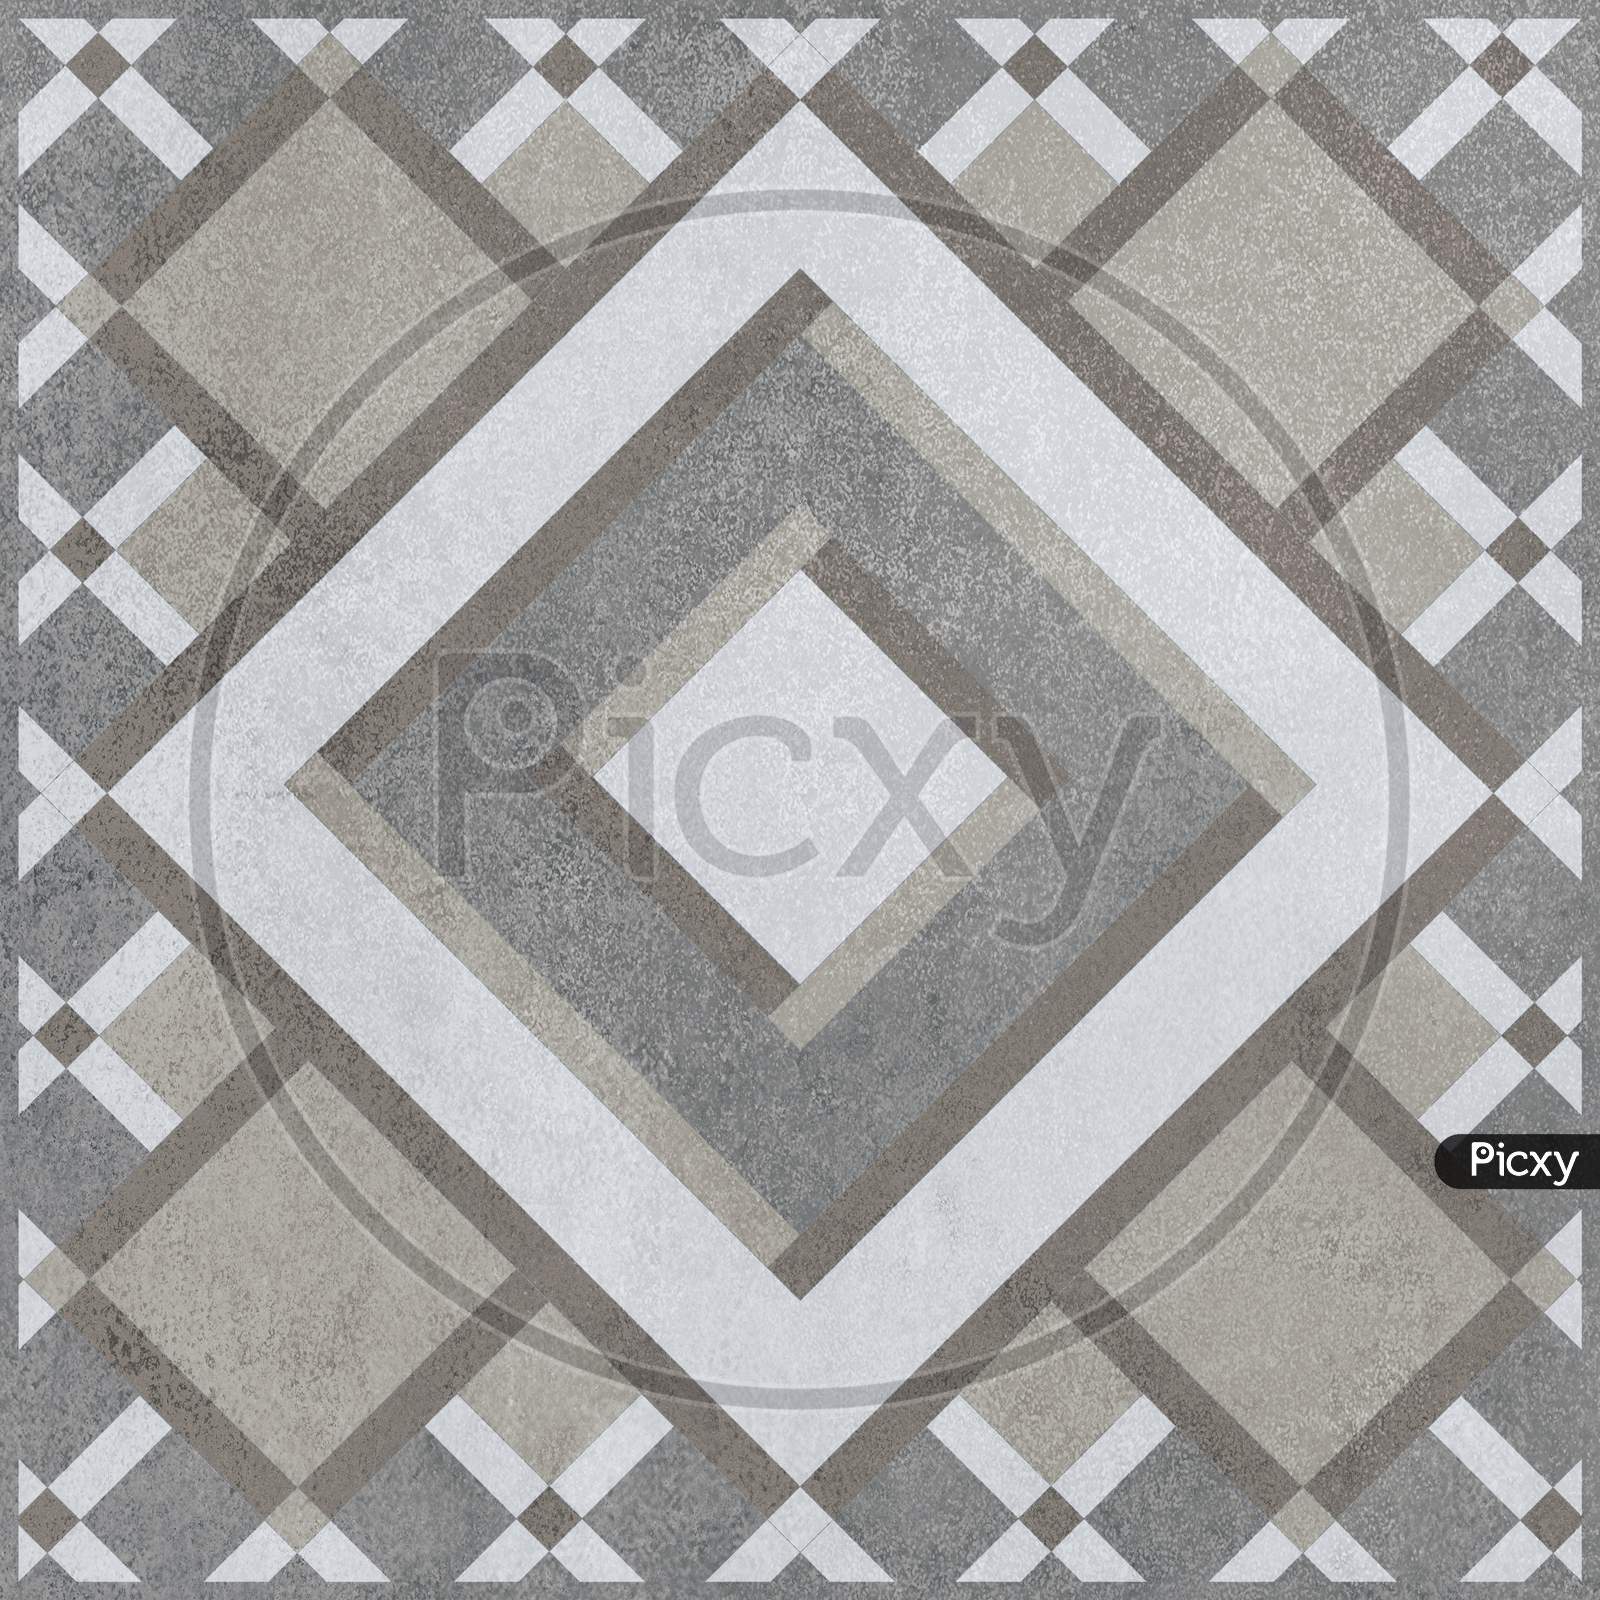 Marble Geometric Pattern Floor And Wall Decor Mosaic Tile.